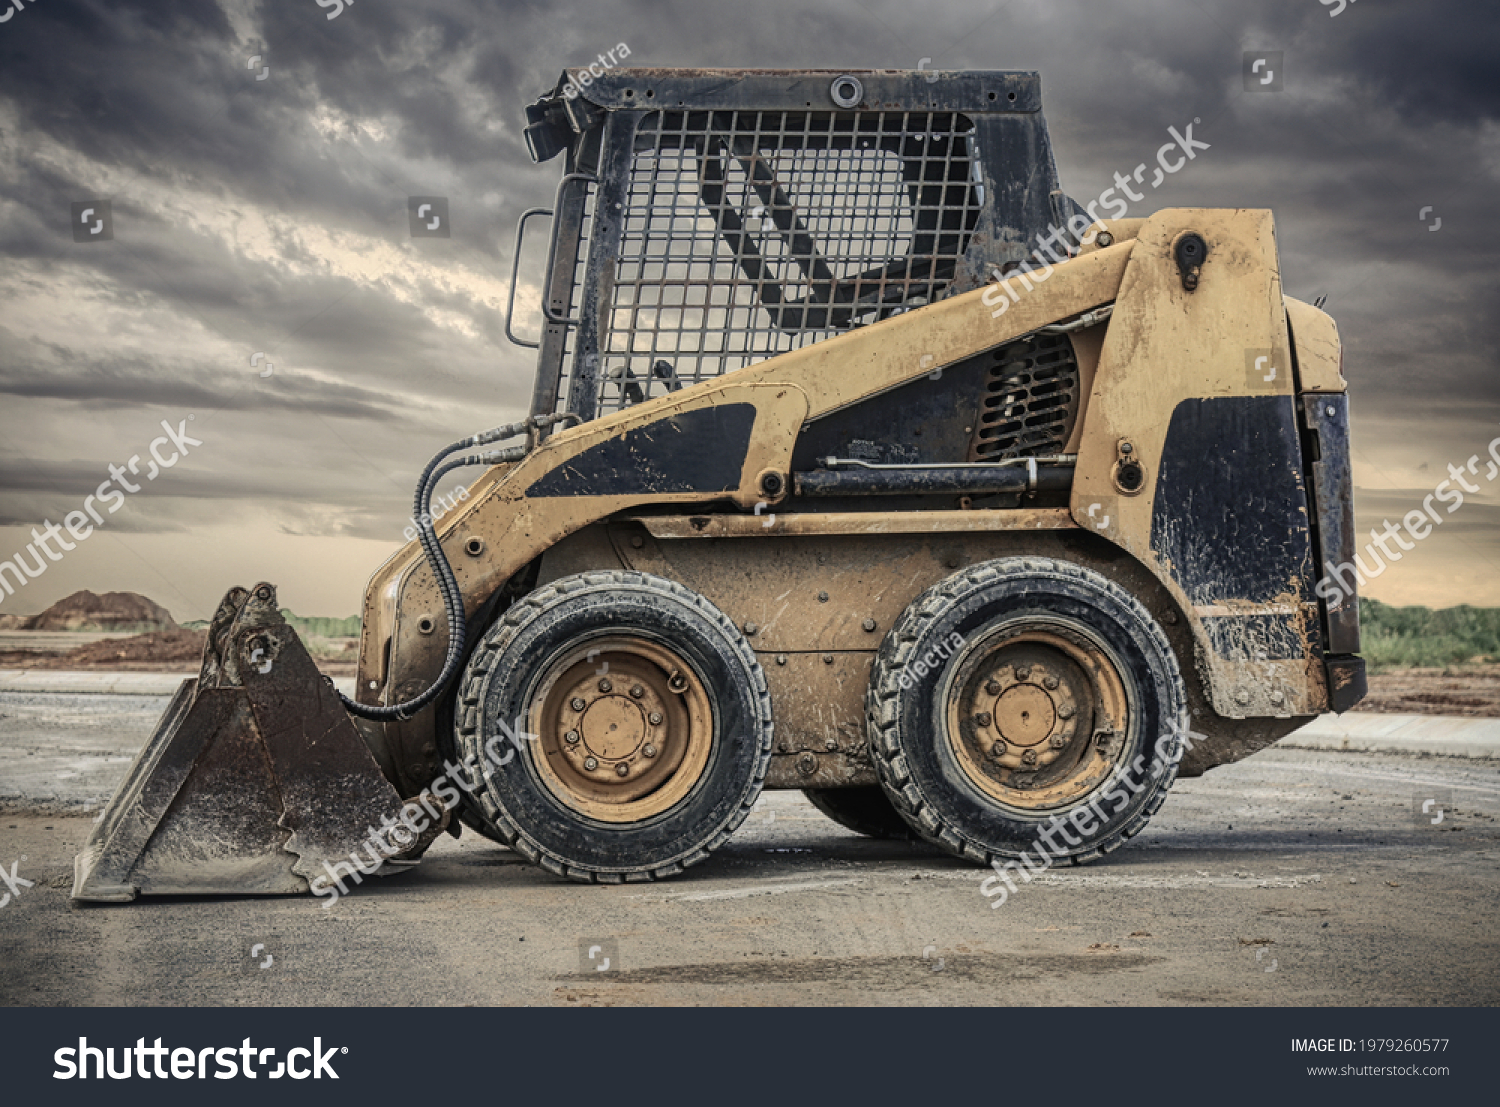 a close up of a bobcat or a skid steer loader used in construction,landscaping and agriculture. It has a many purpose bucket in the front. #1979260577